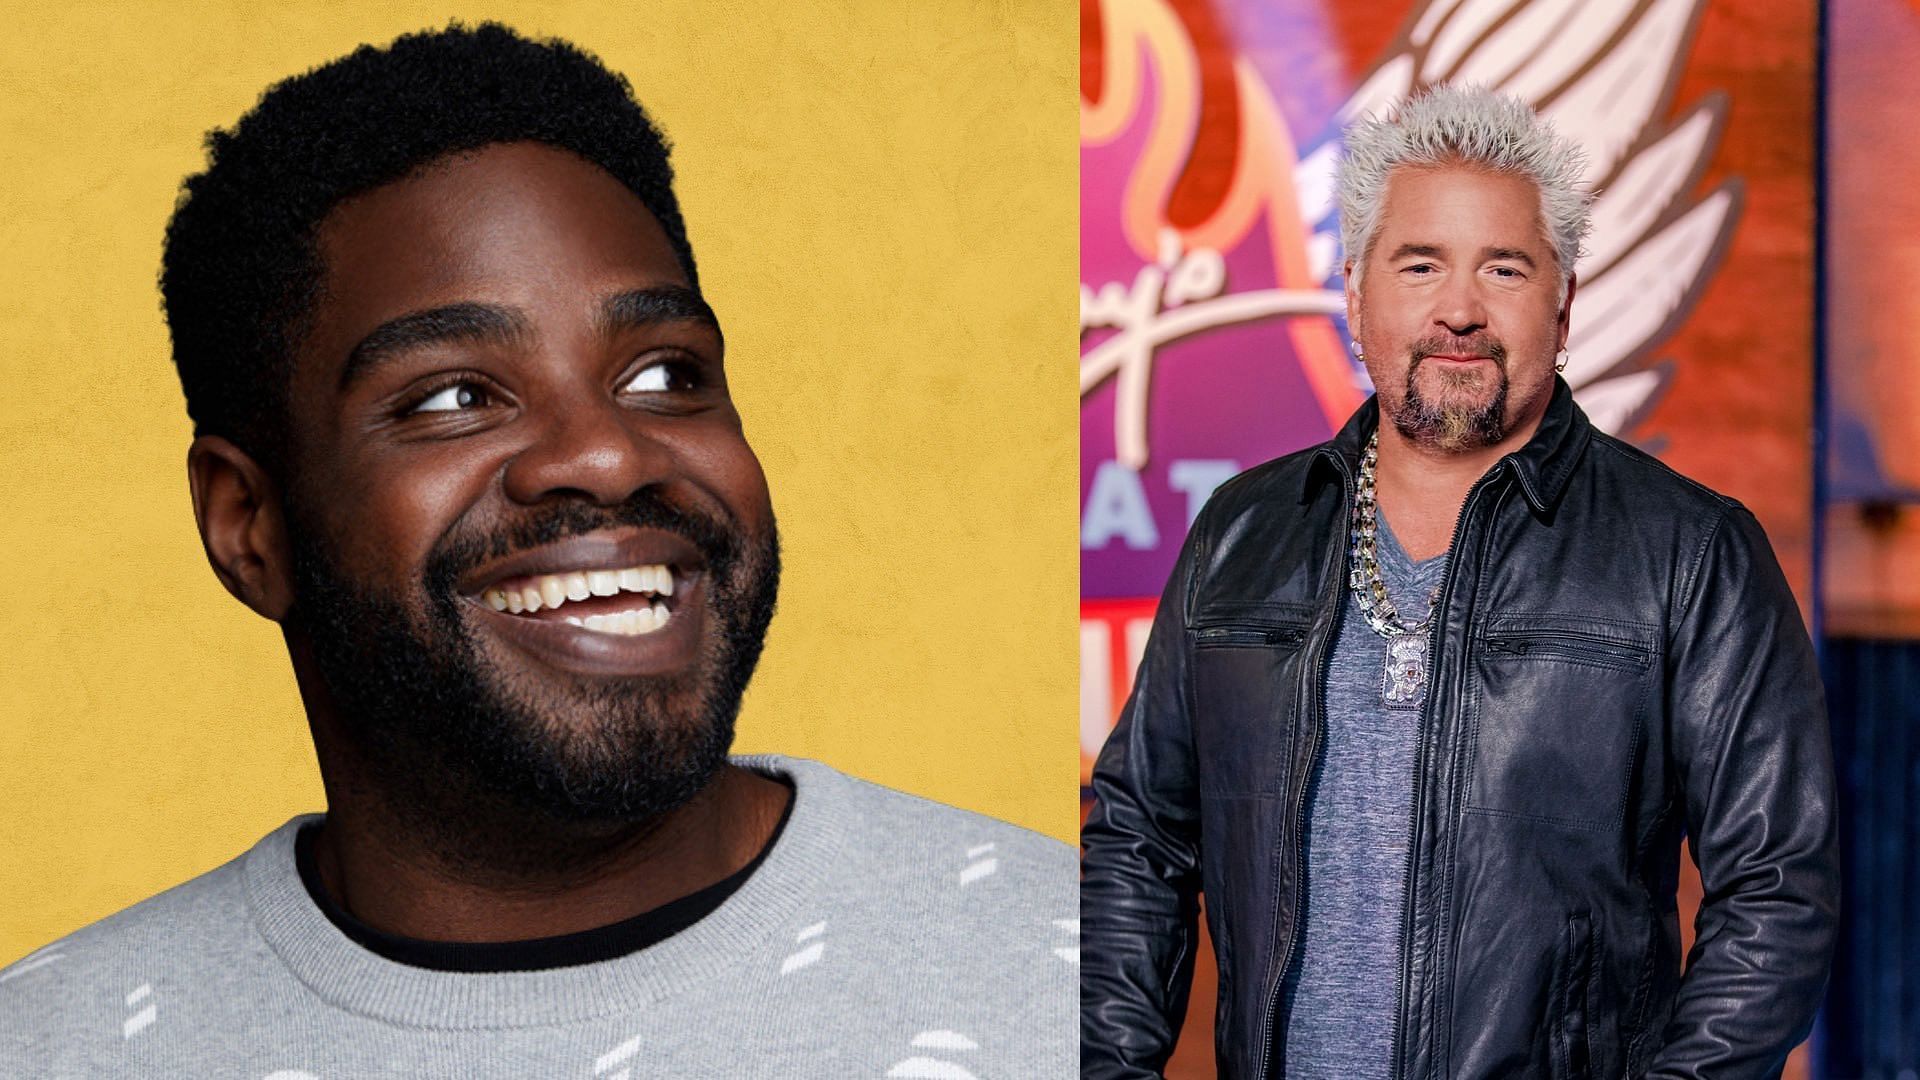 Ron Funches to appear on Guy